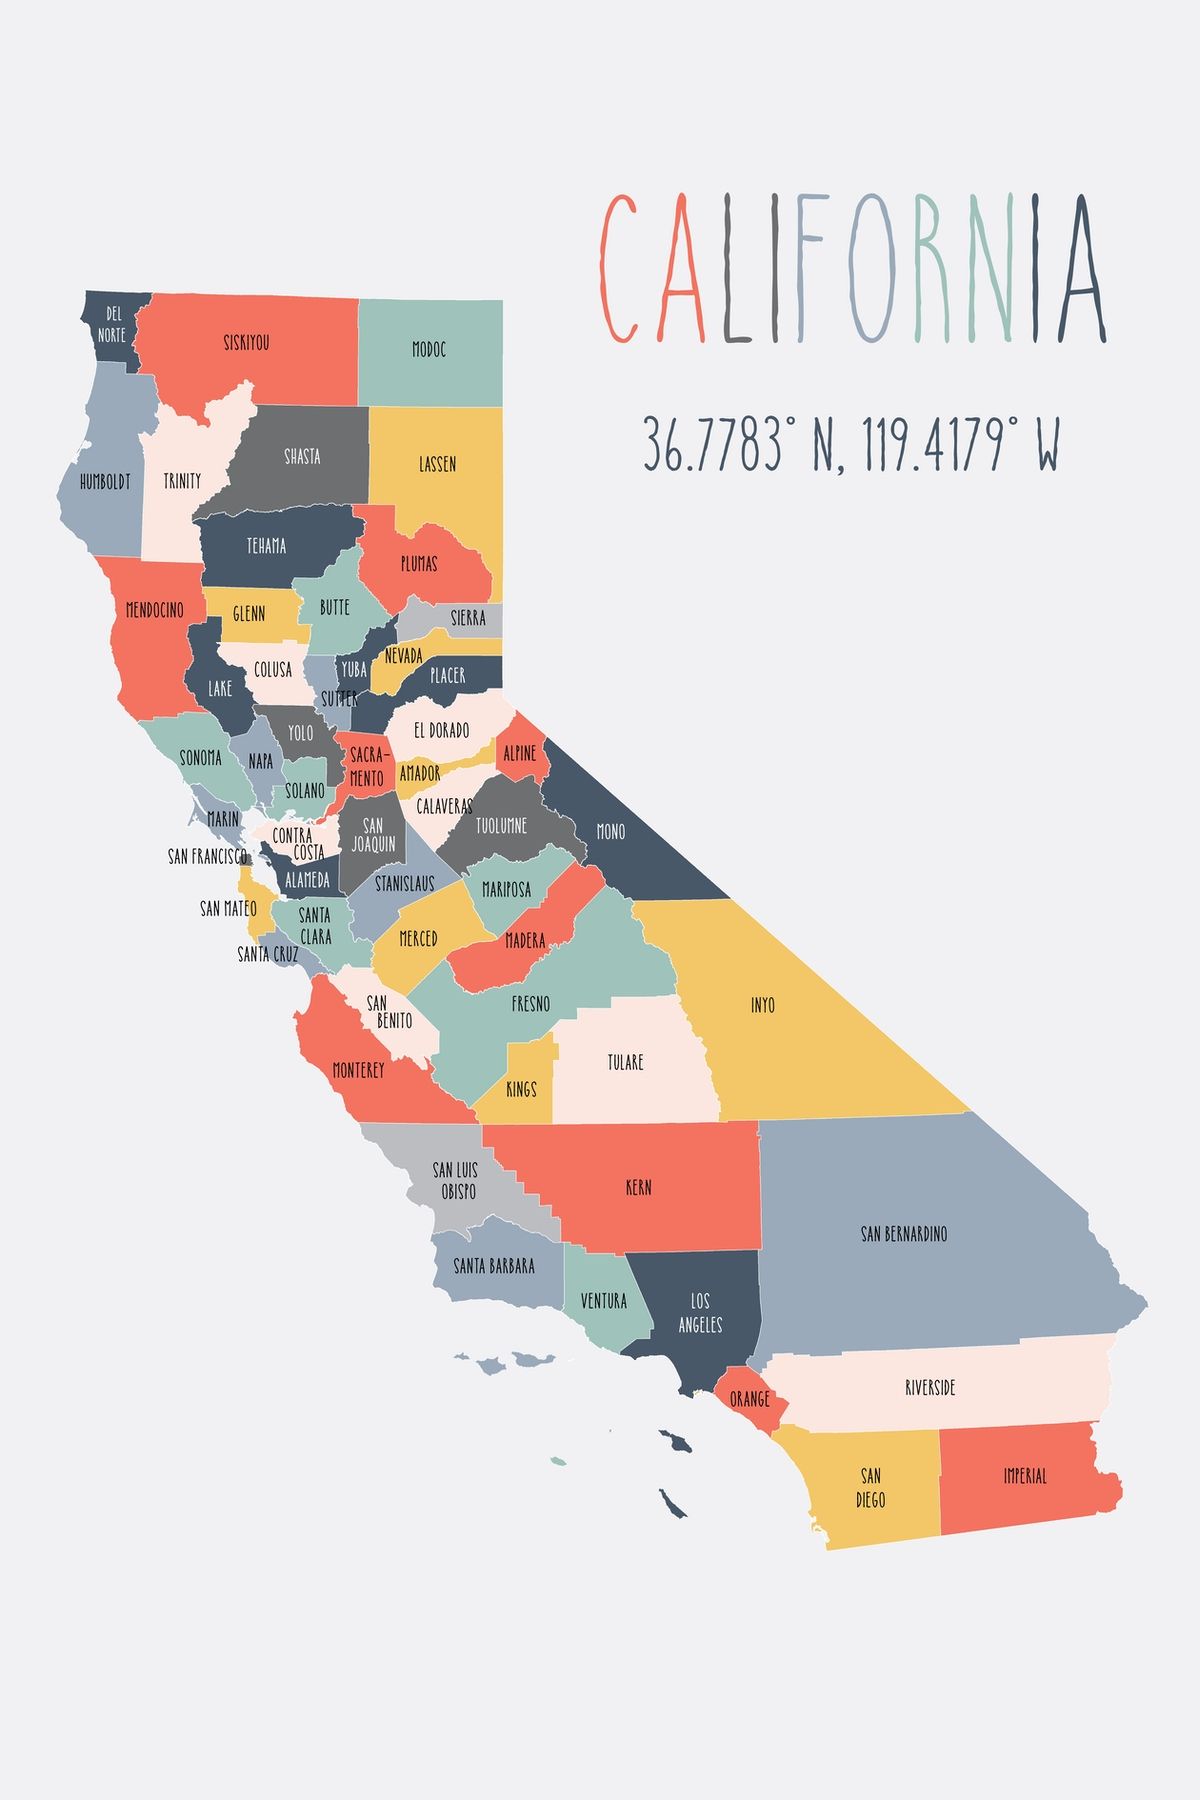 California map with the state's name and a colorful design - California